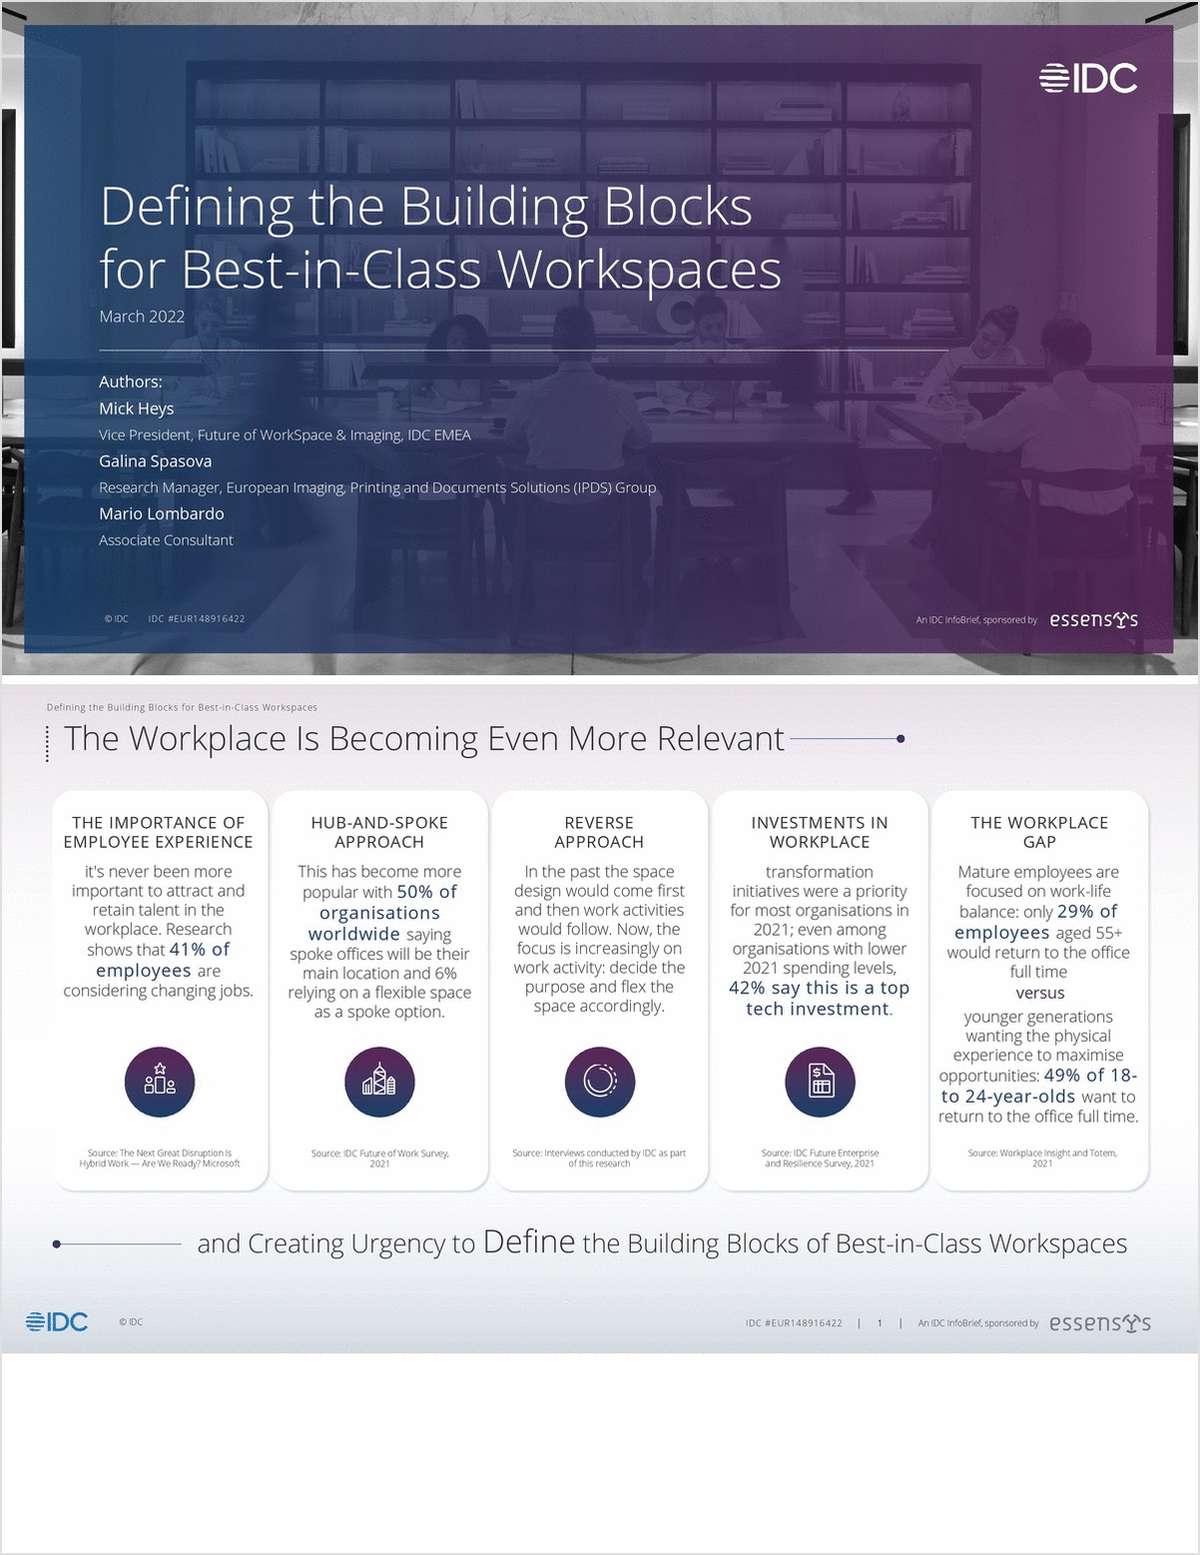 Defining the Building Blocks for Best-in-Class Workspaces